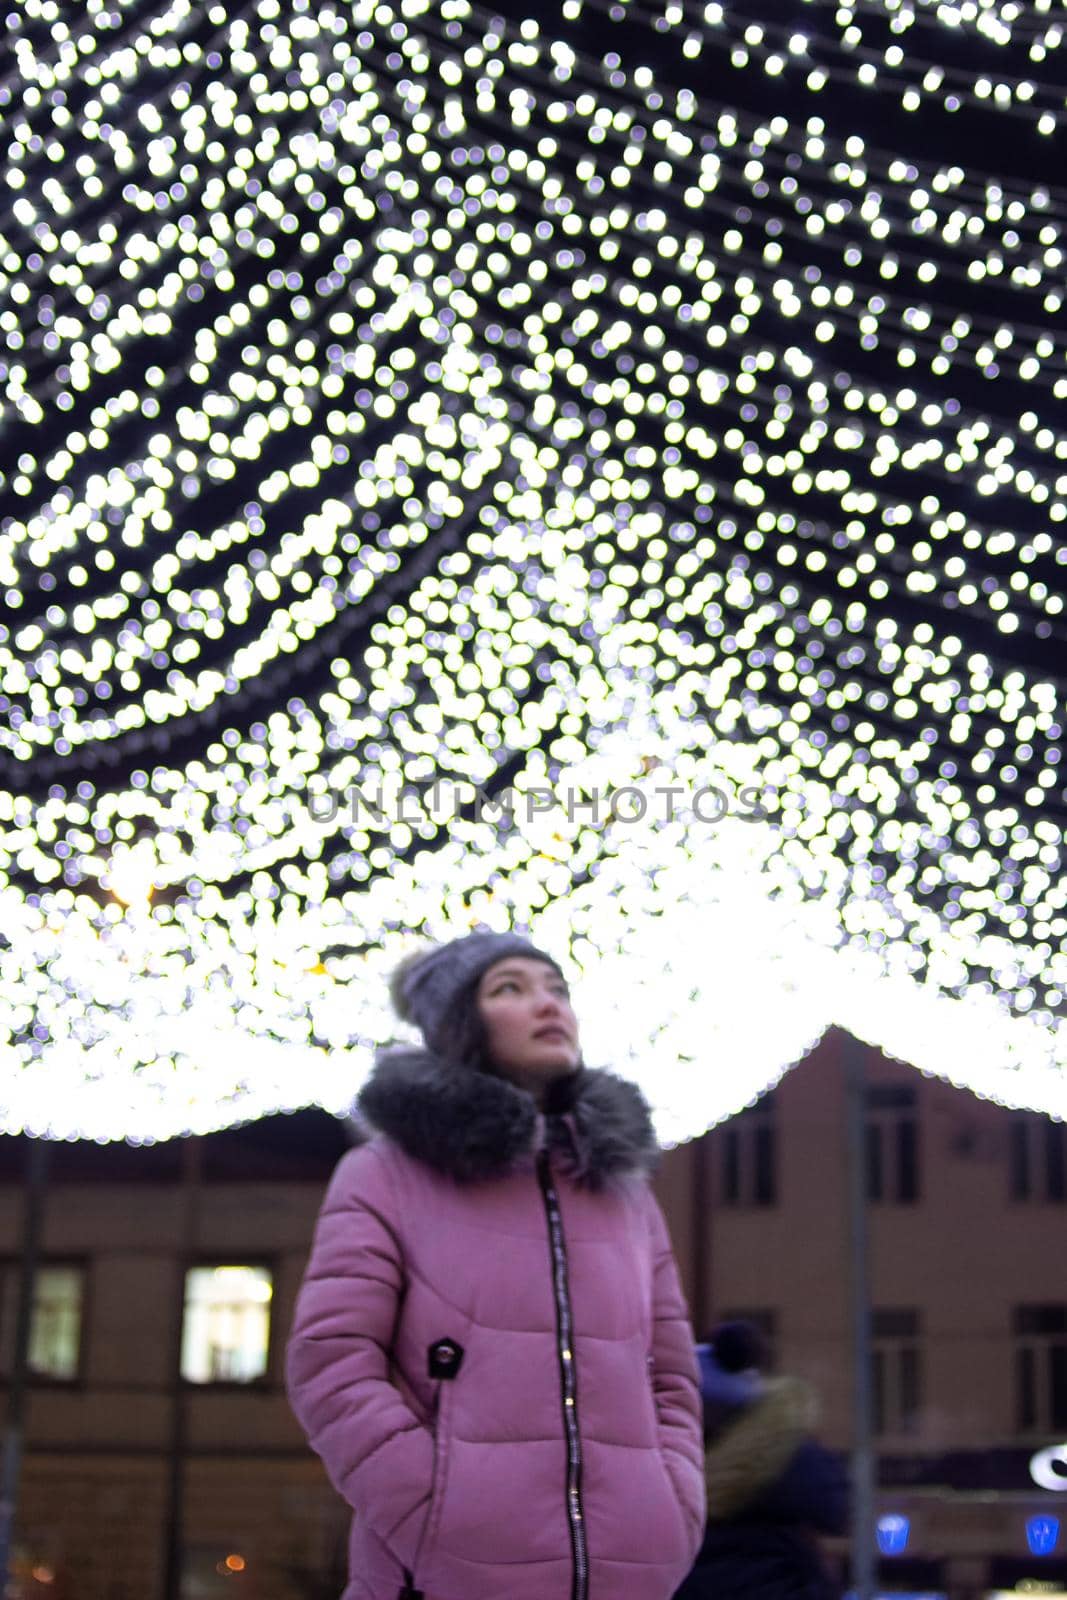 Young woman looks up, downtown with christmas lights, sky festive illumination shine and glow, defocus image by Clara_Sh